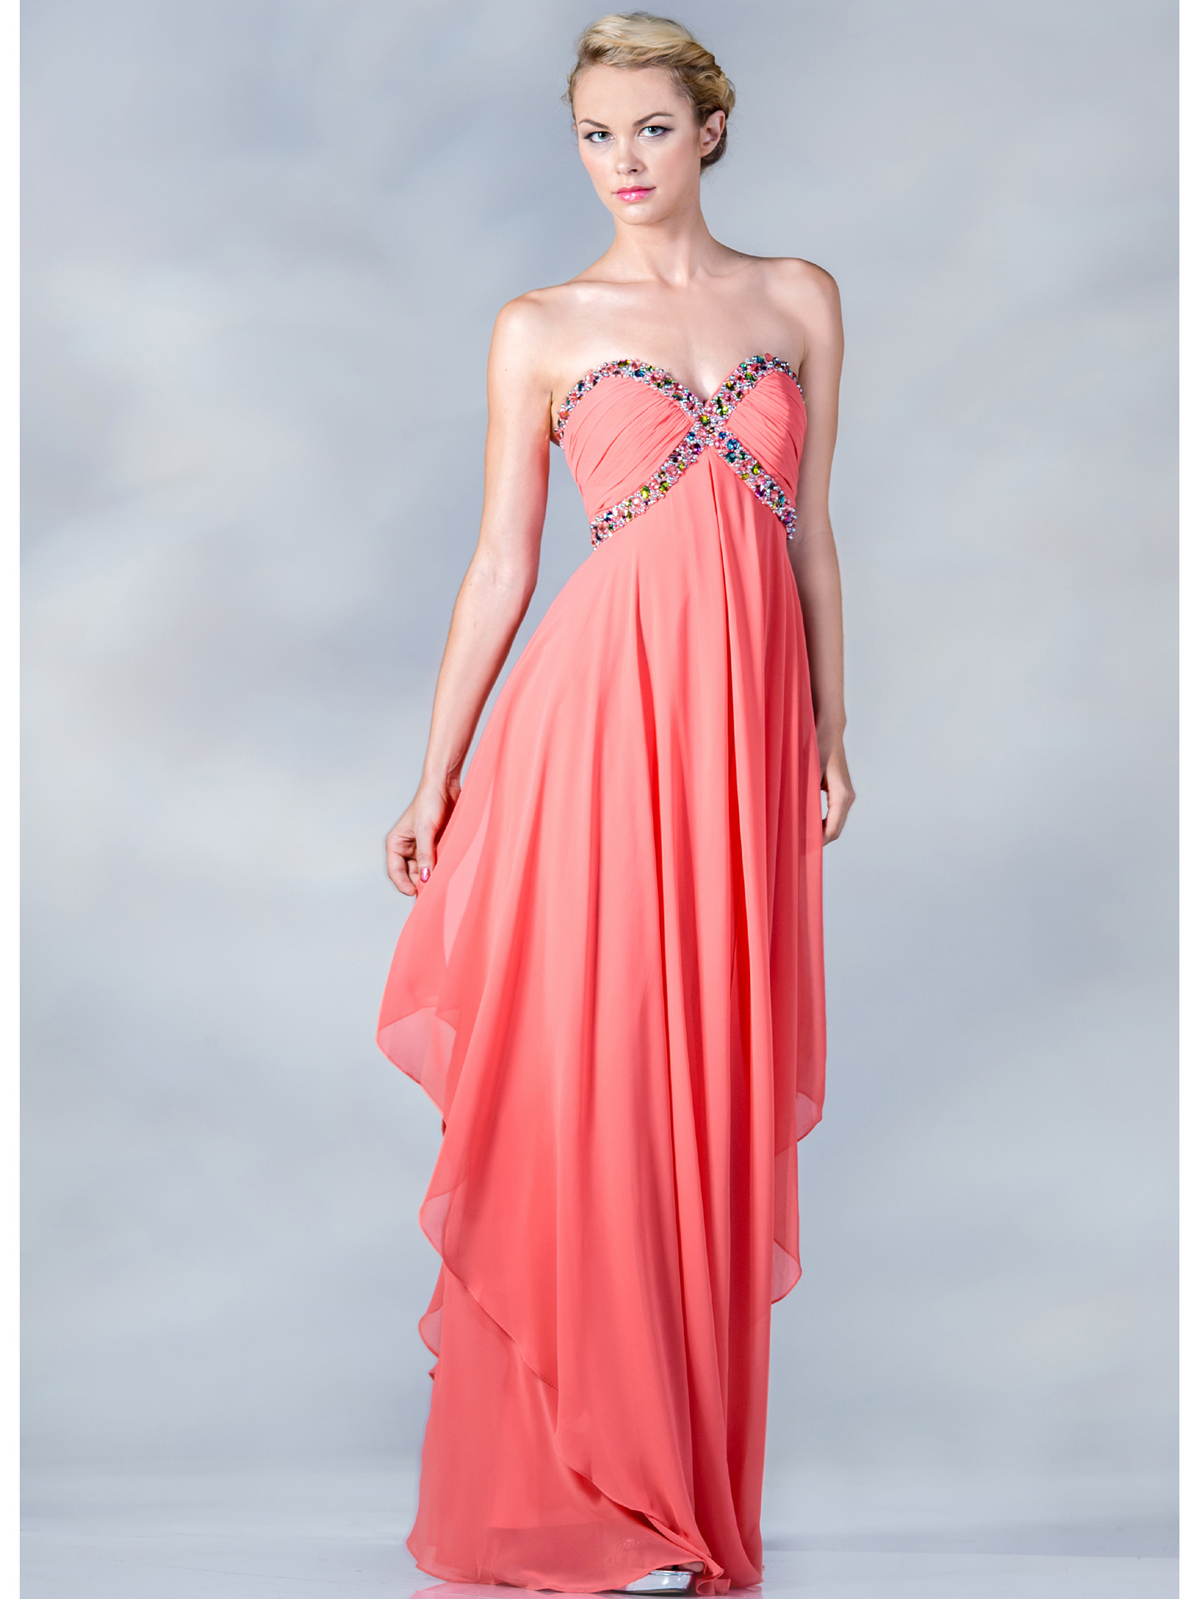 Coral prom dresses